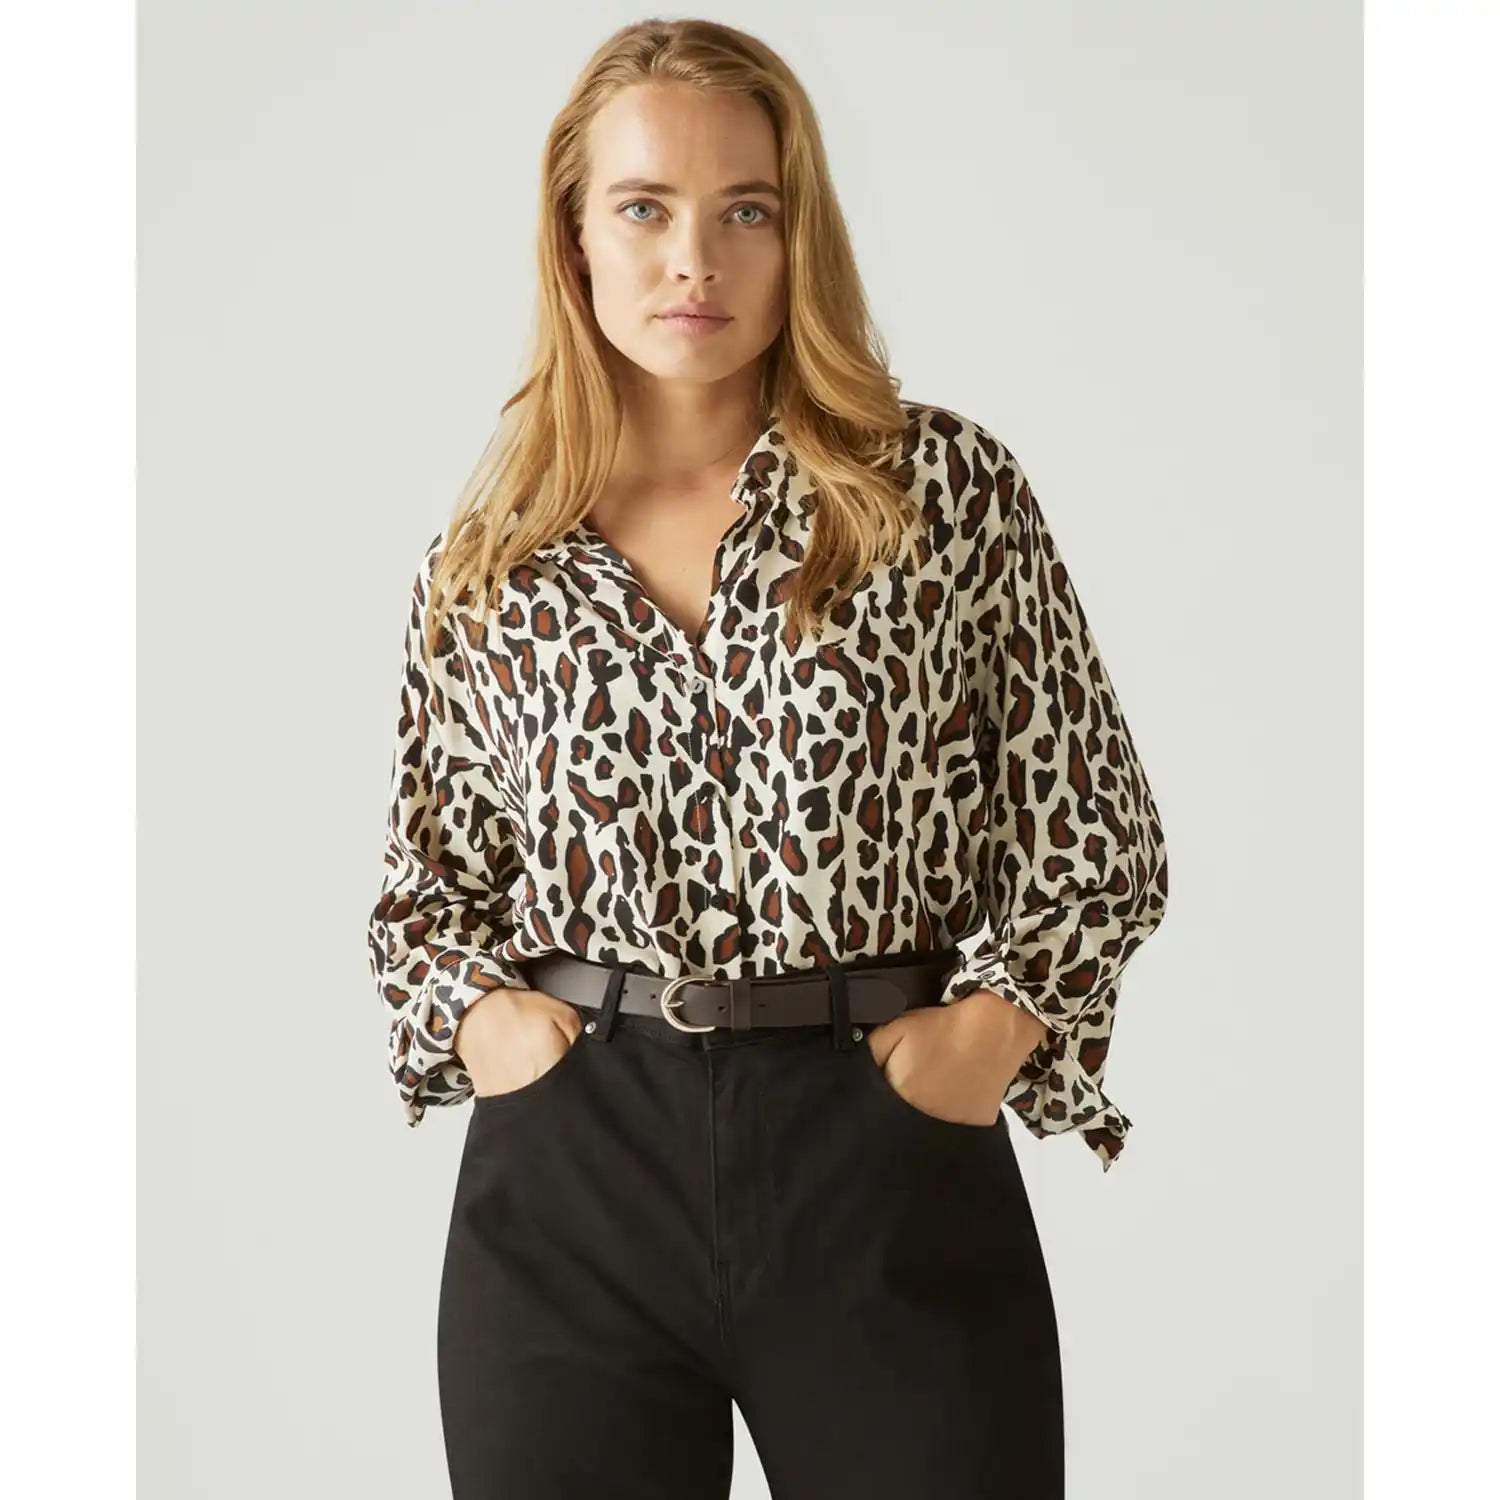 Couchel Animal Print Blouse - Raw 1 Shaws Department Stores